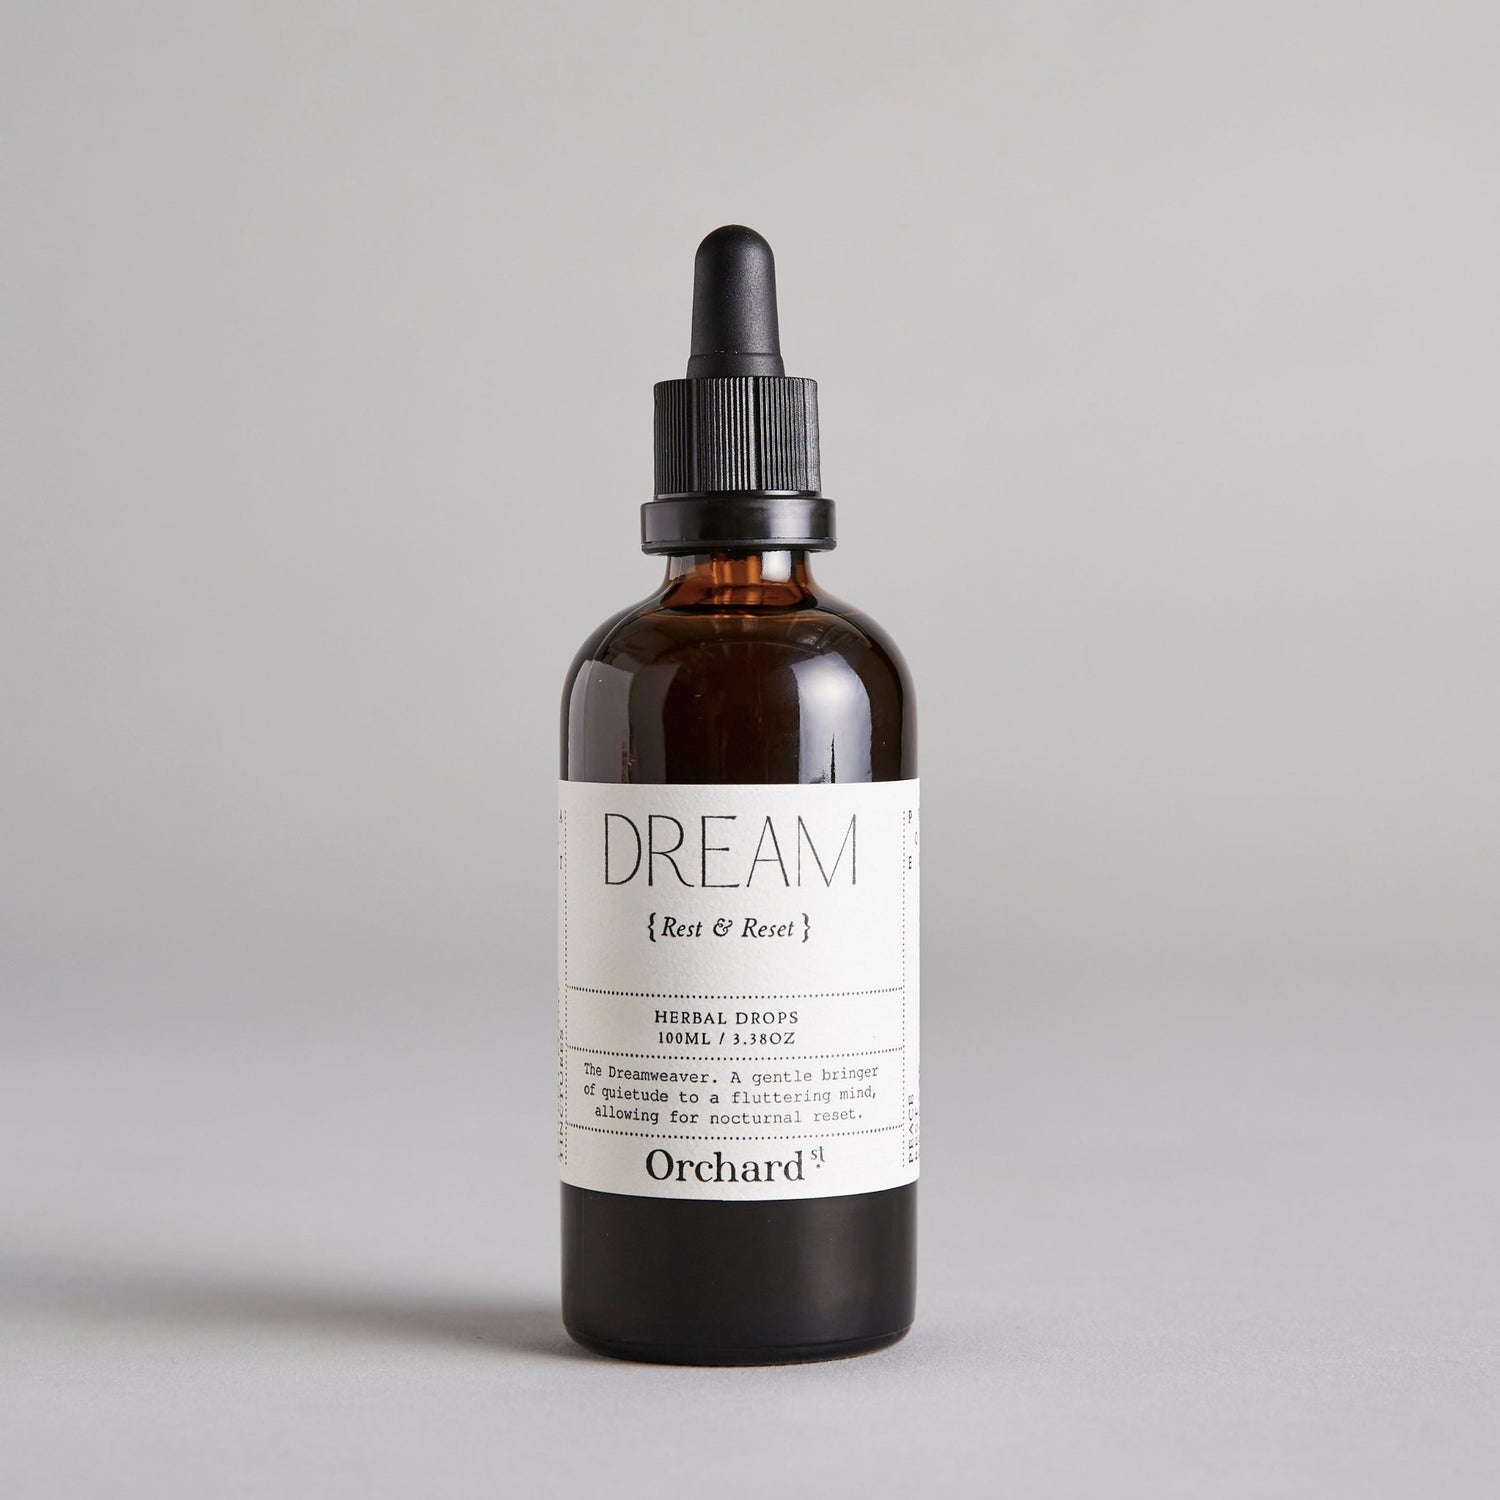 Orchard St Dream Tincture - The Slow Clinic